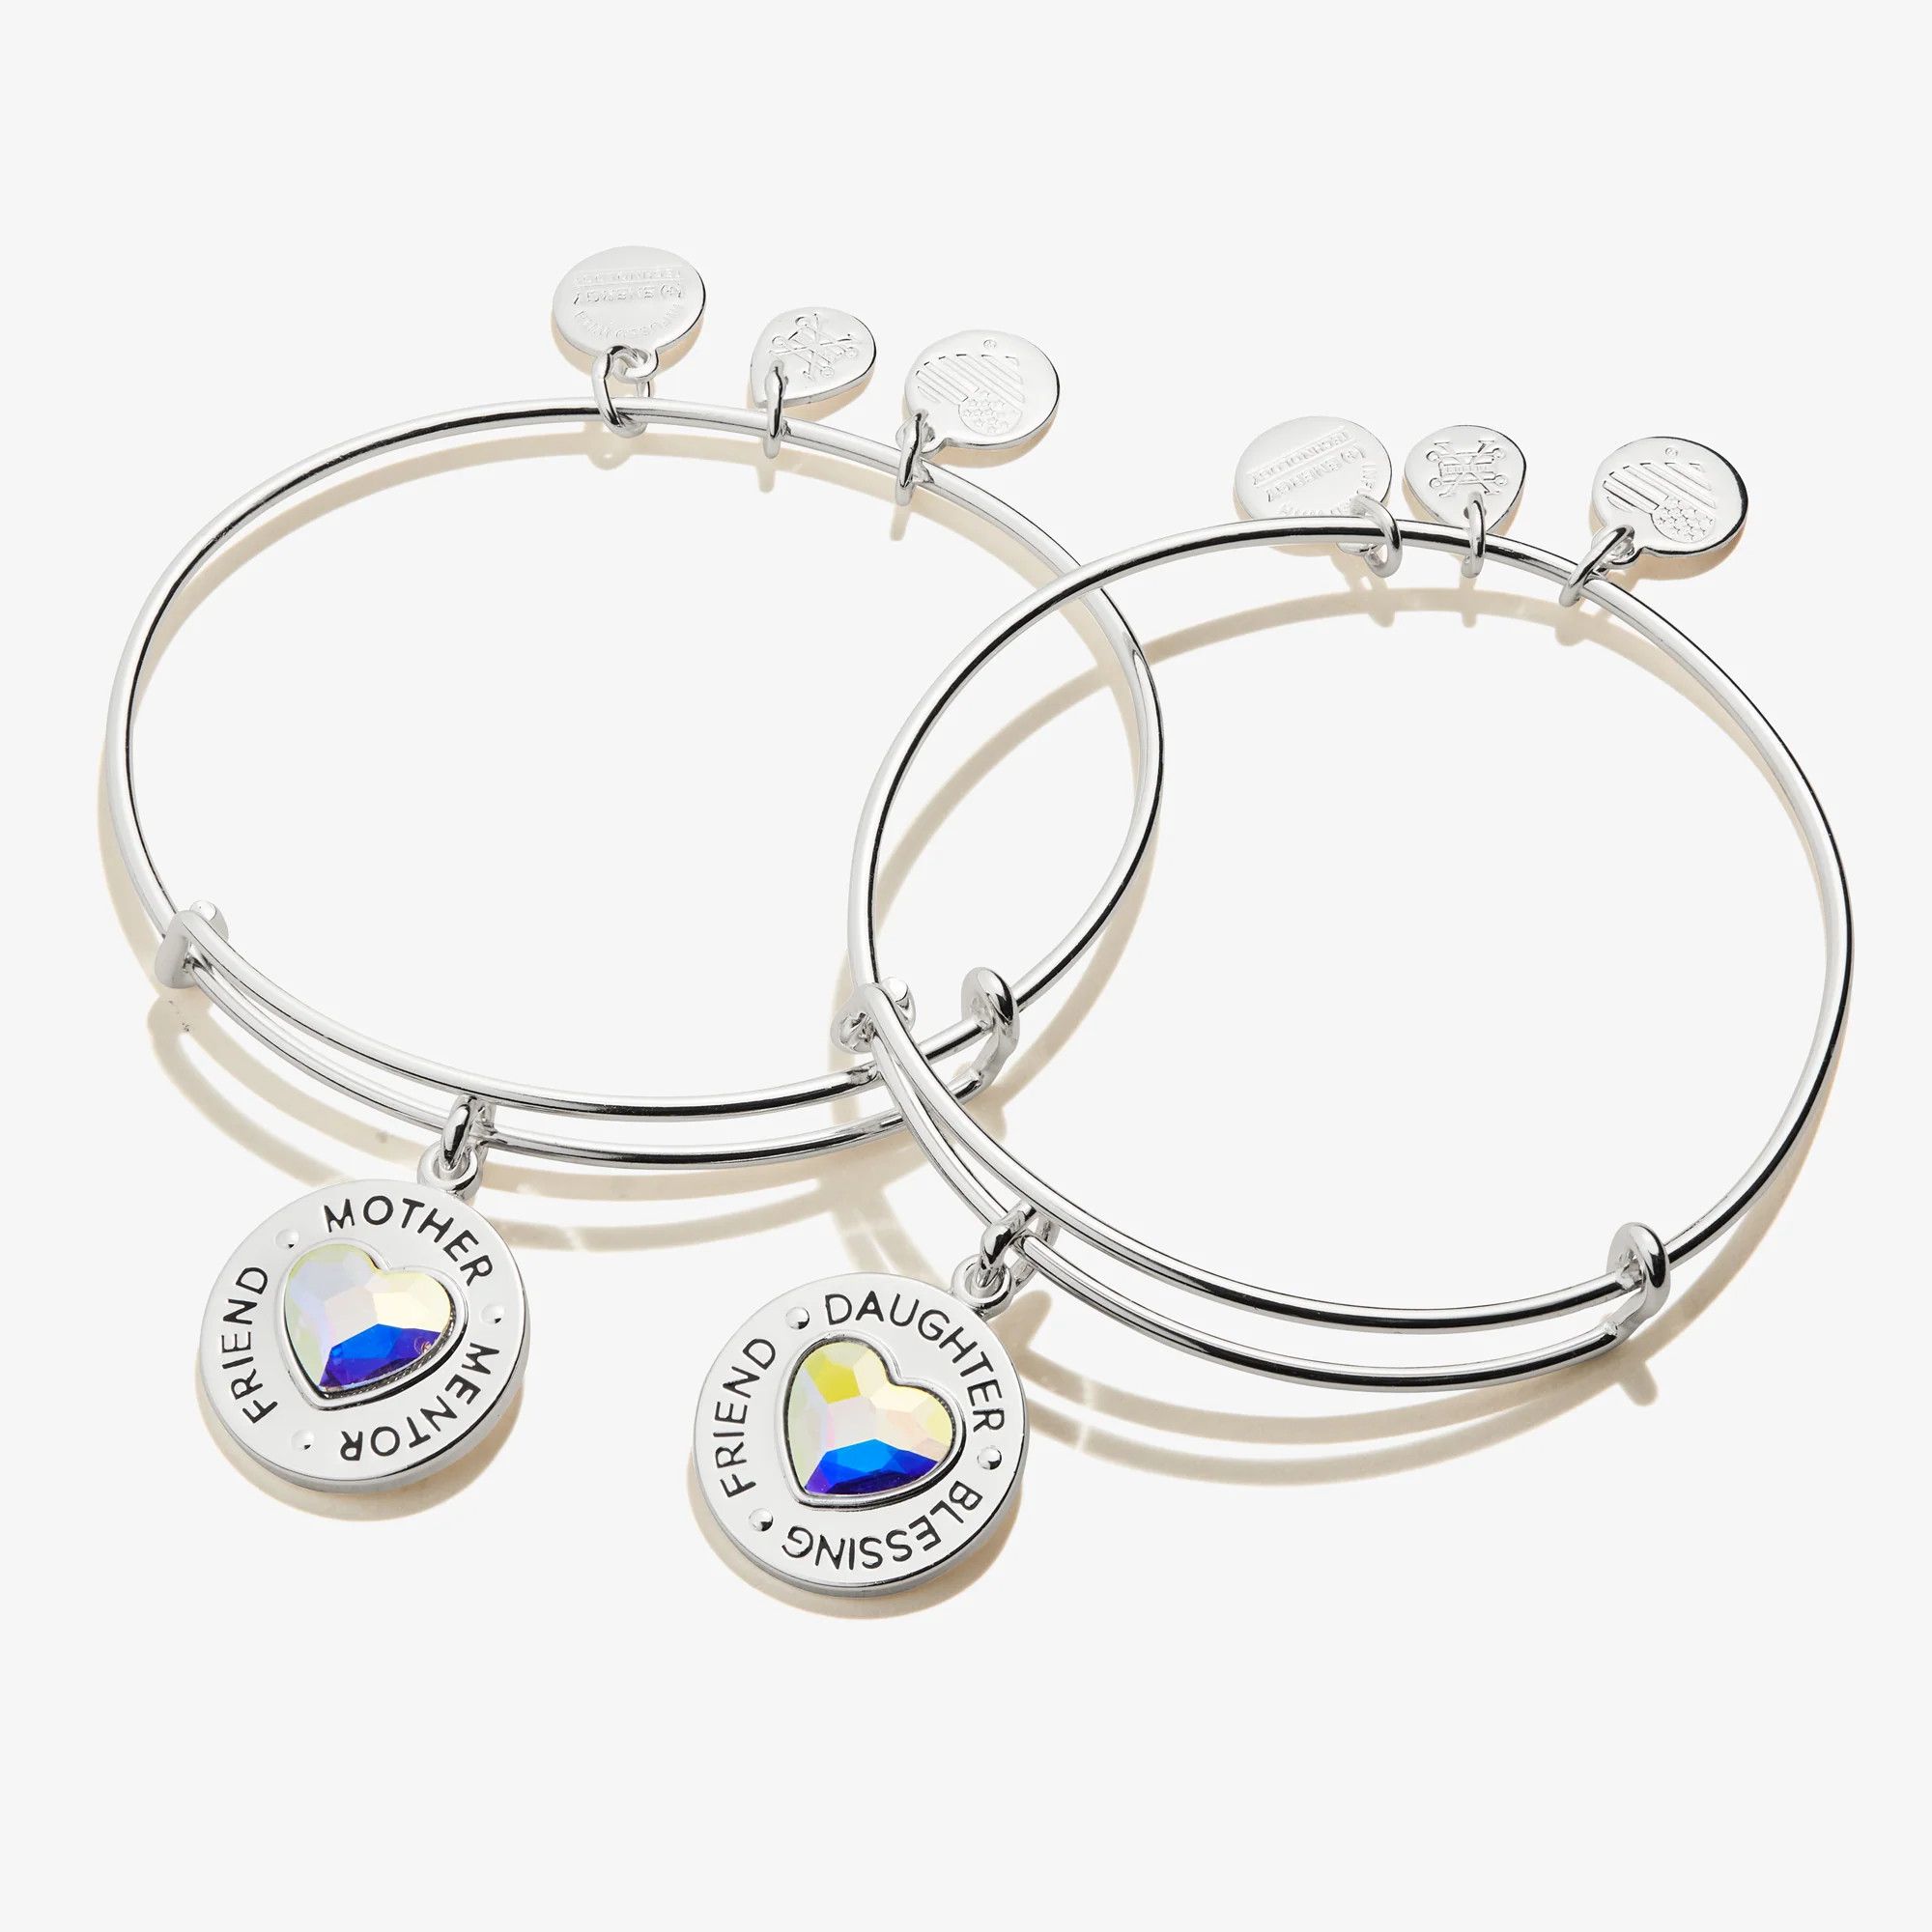 Mother Daughter Charm Bangles, Set of 2 - Alex and Ani | Alex and Ani